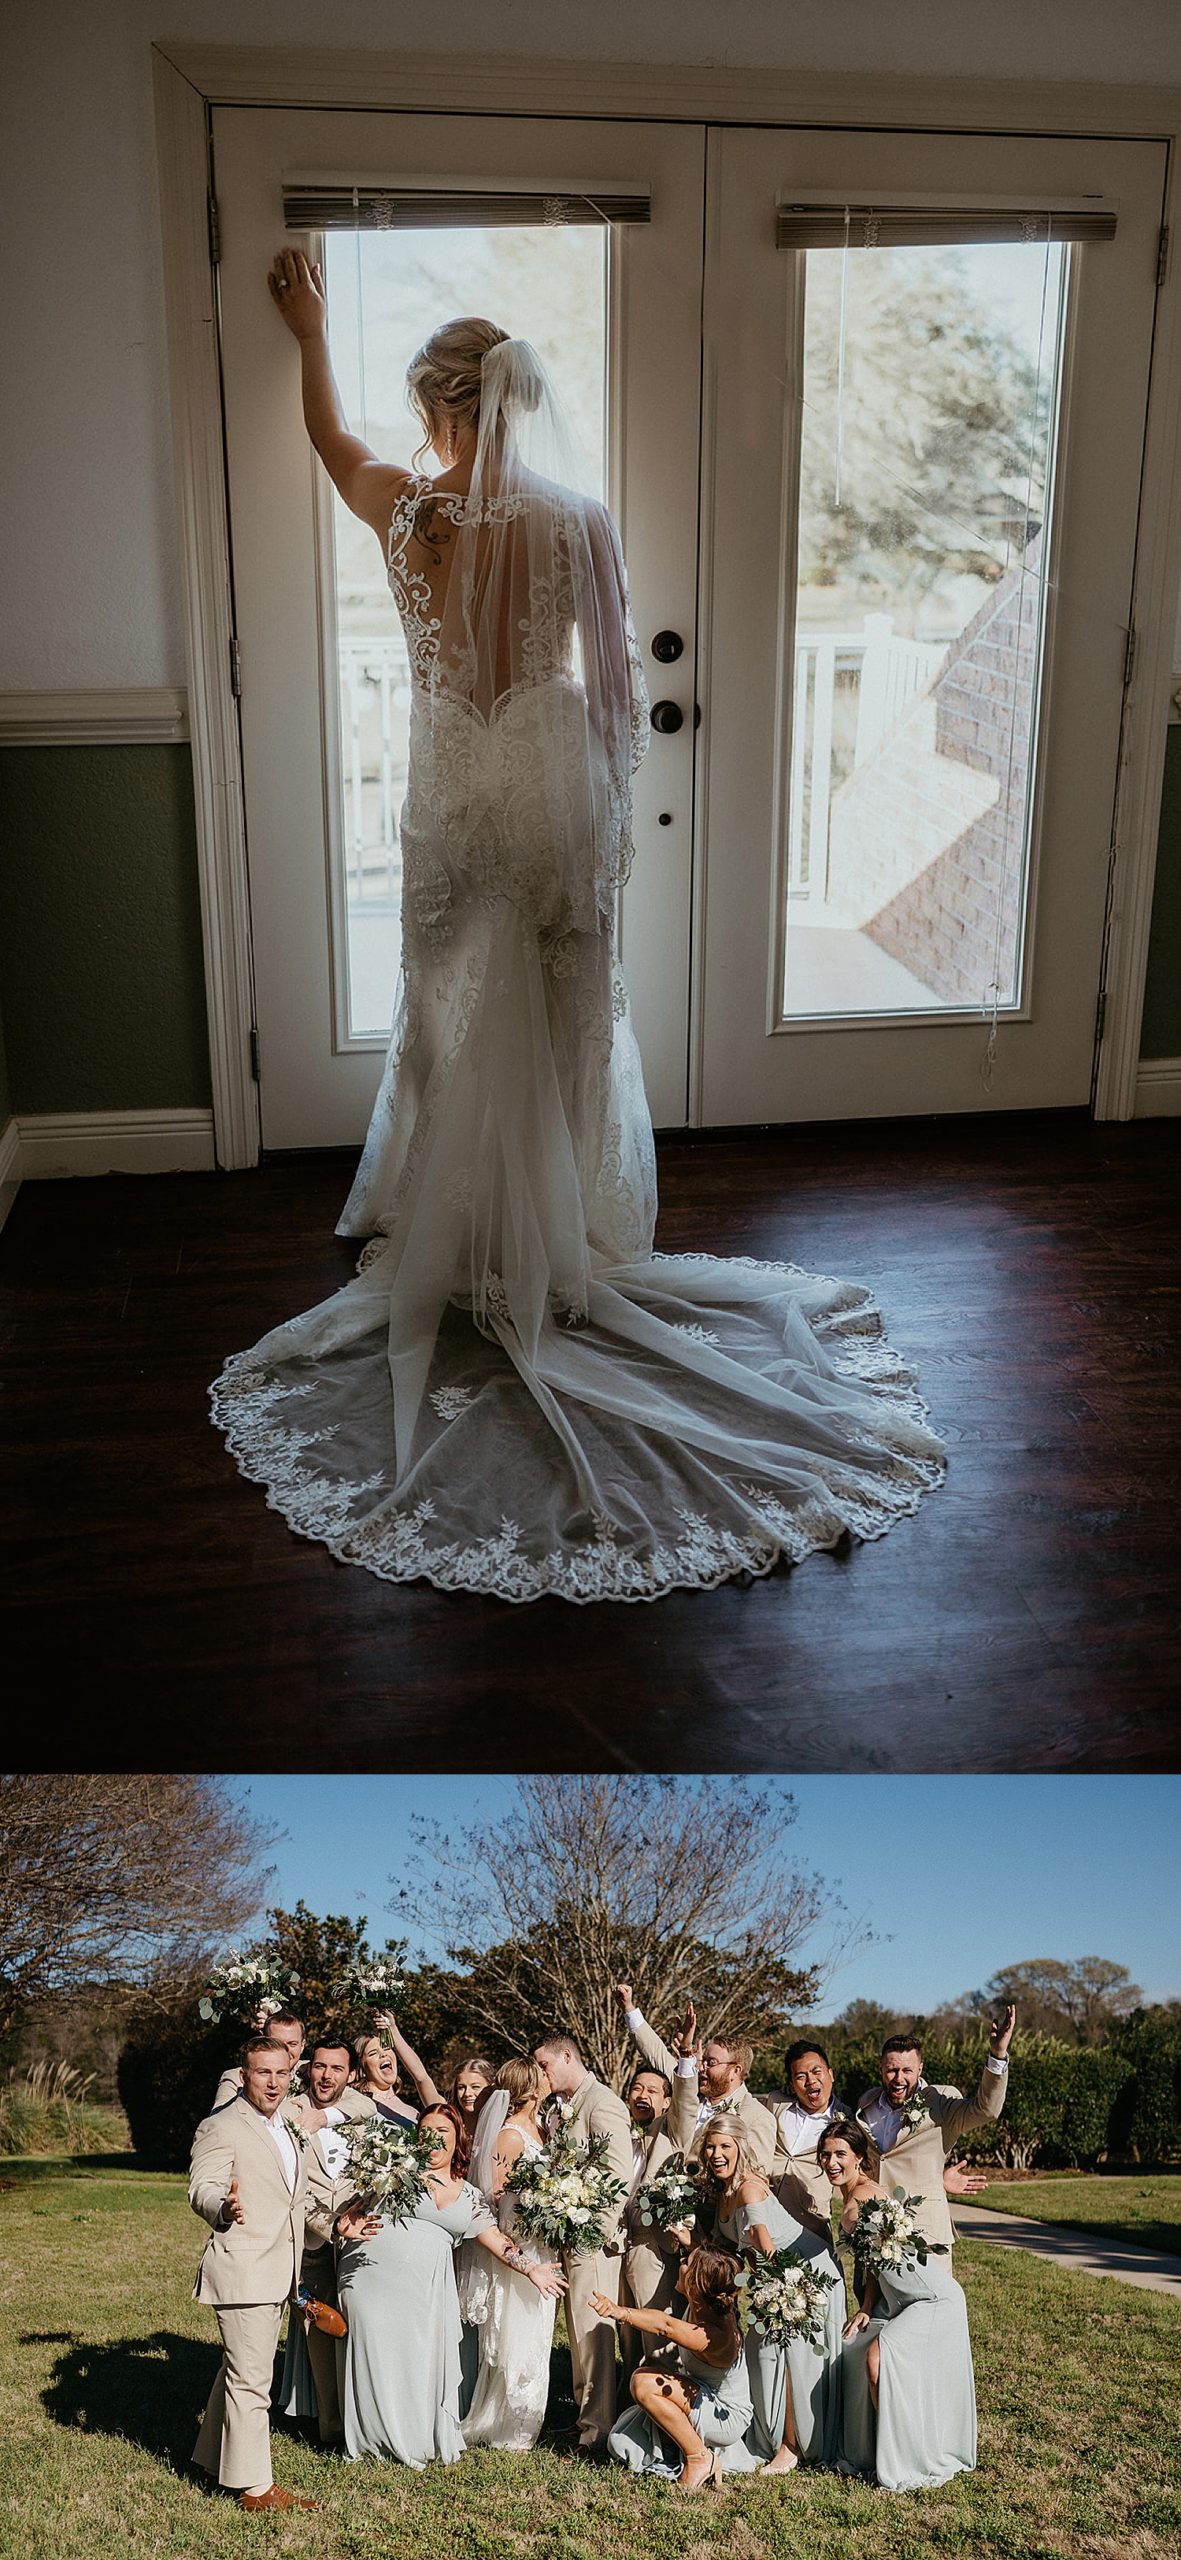 Bridal portrait at Lauren Hill Farm with wedding veil and lace wedding dress with Train